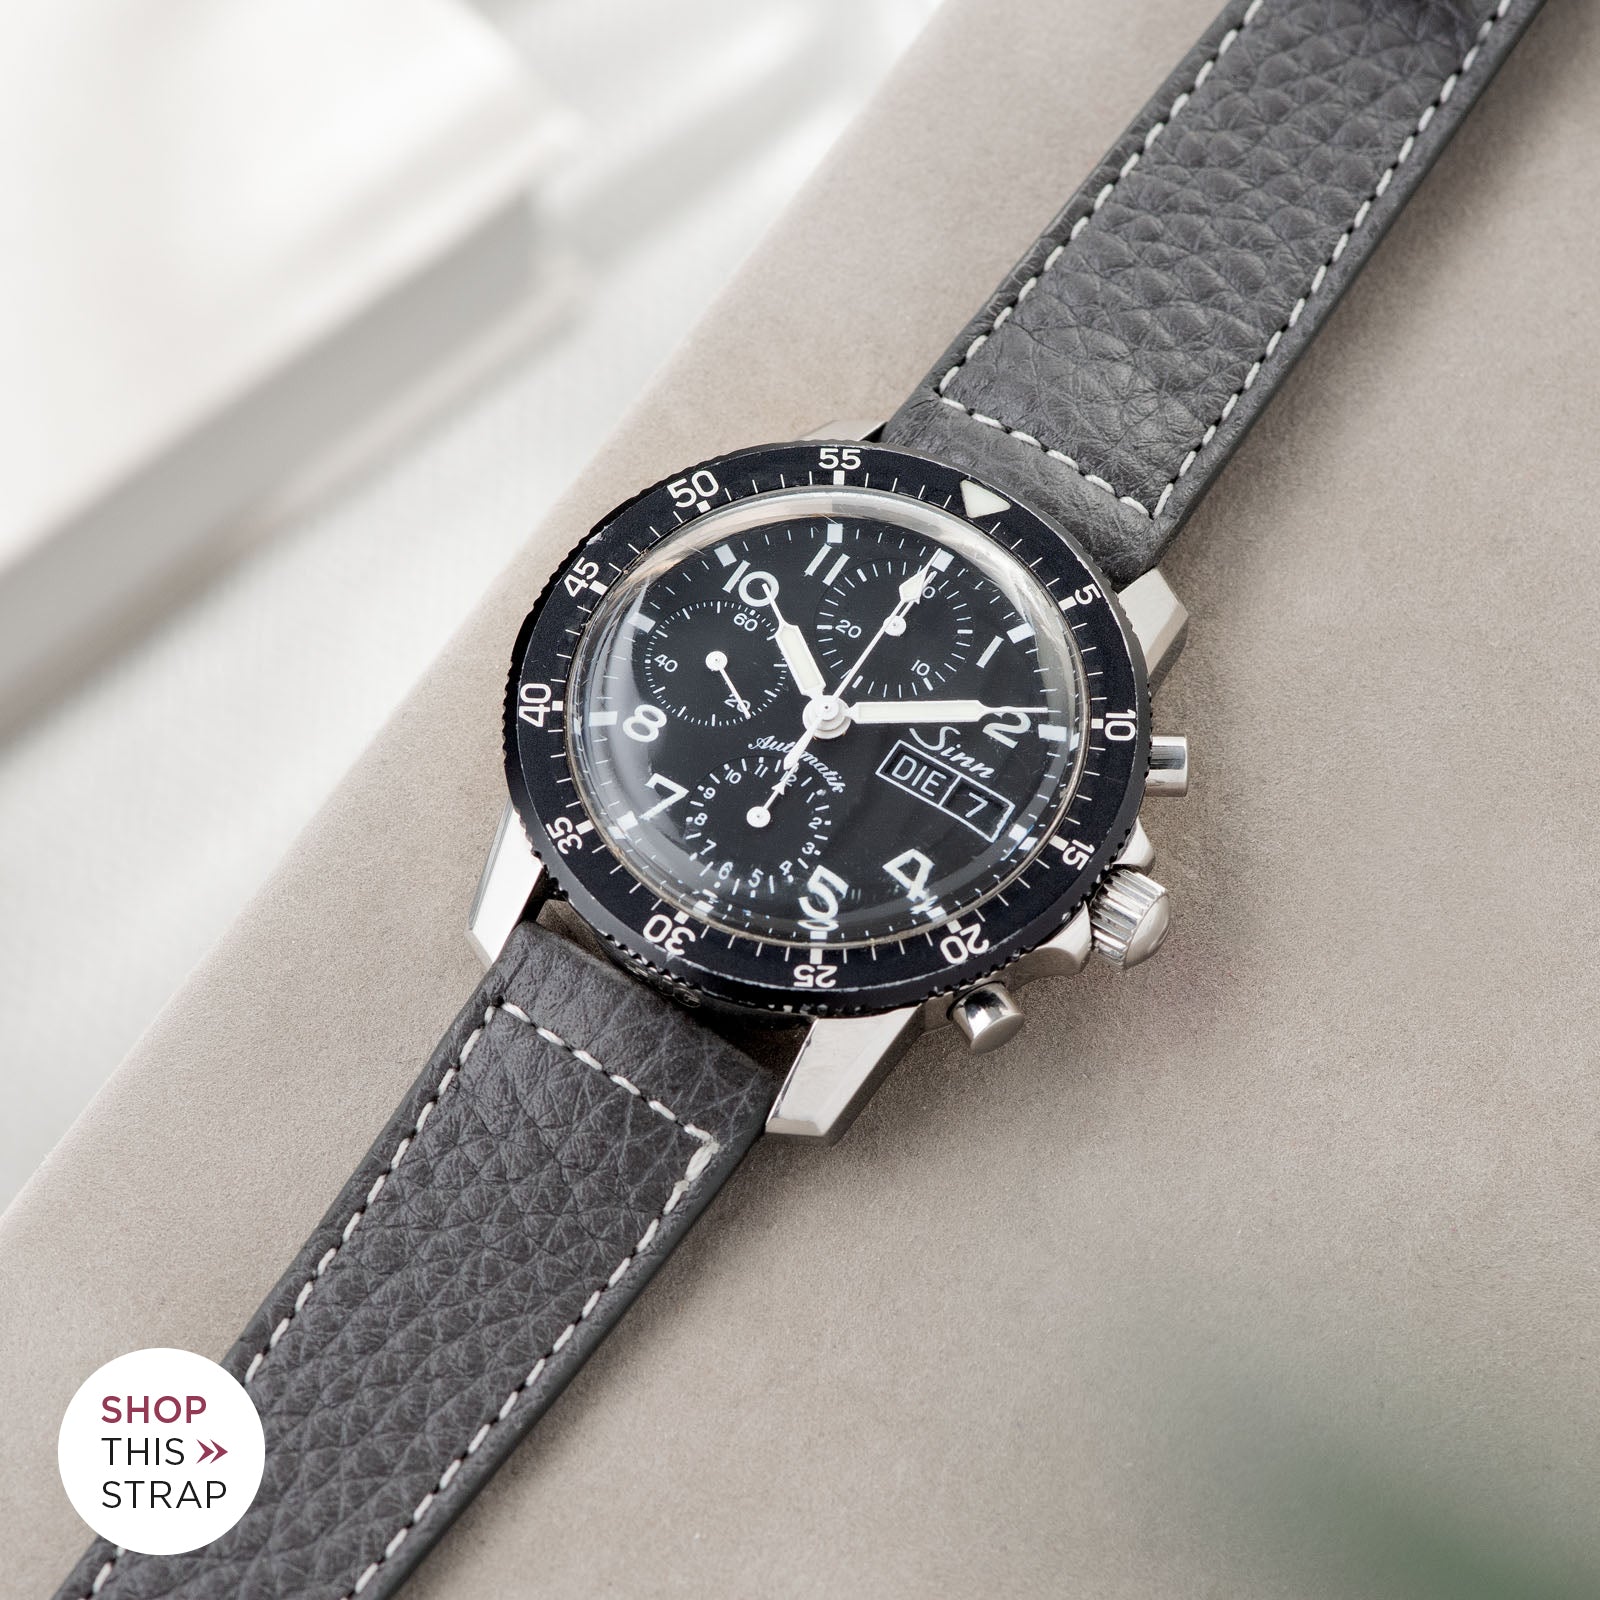 Bulang and Sons_Strap Guide_Sinn 103St Flieder Chronograph_Elephant Grey Leather Watch Strap